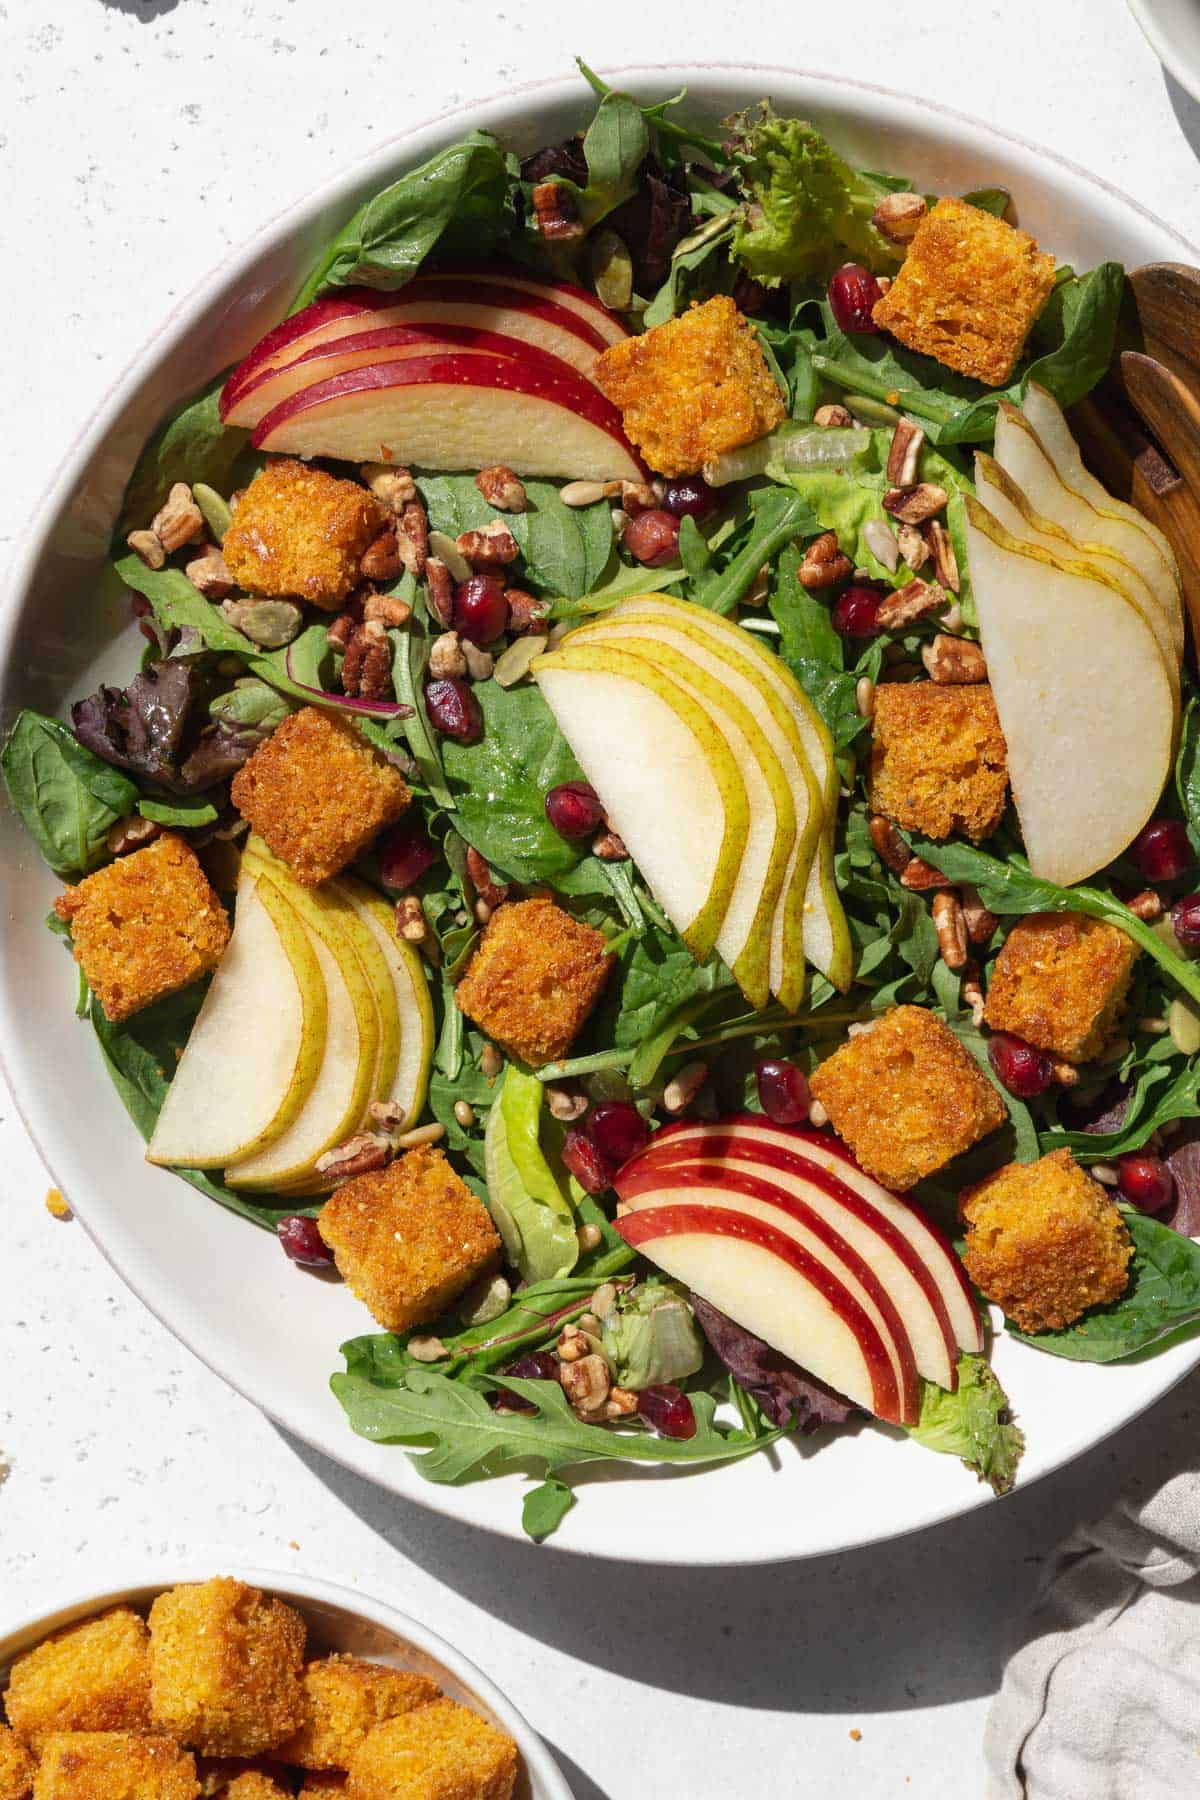 A large bowl of salad with sliced apples, pears, and cornbread croutons.